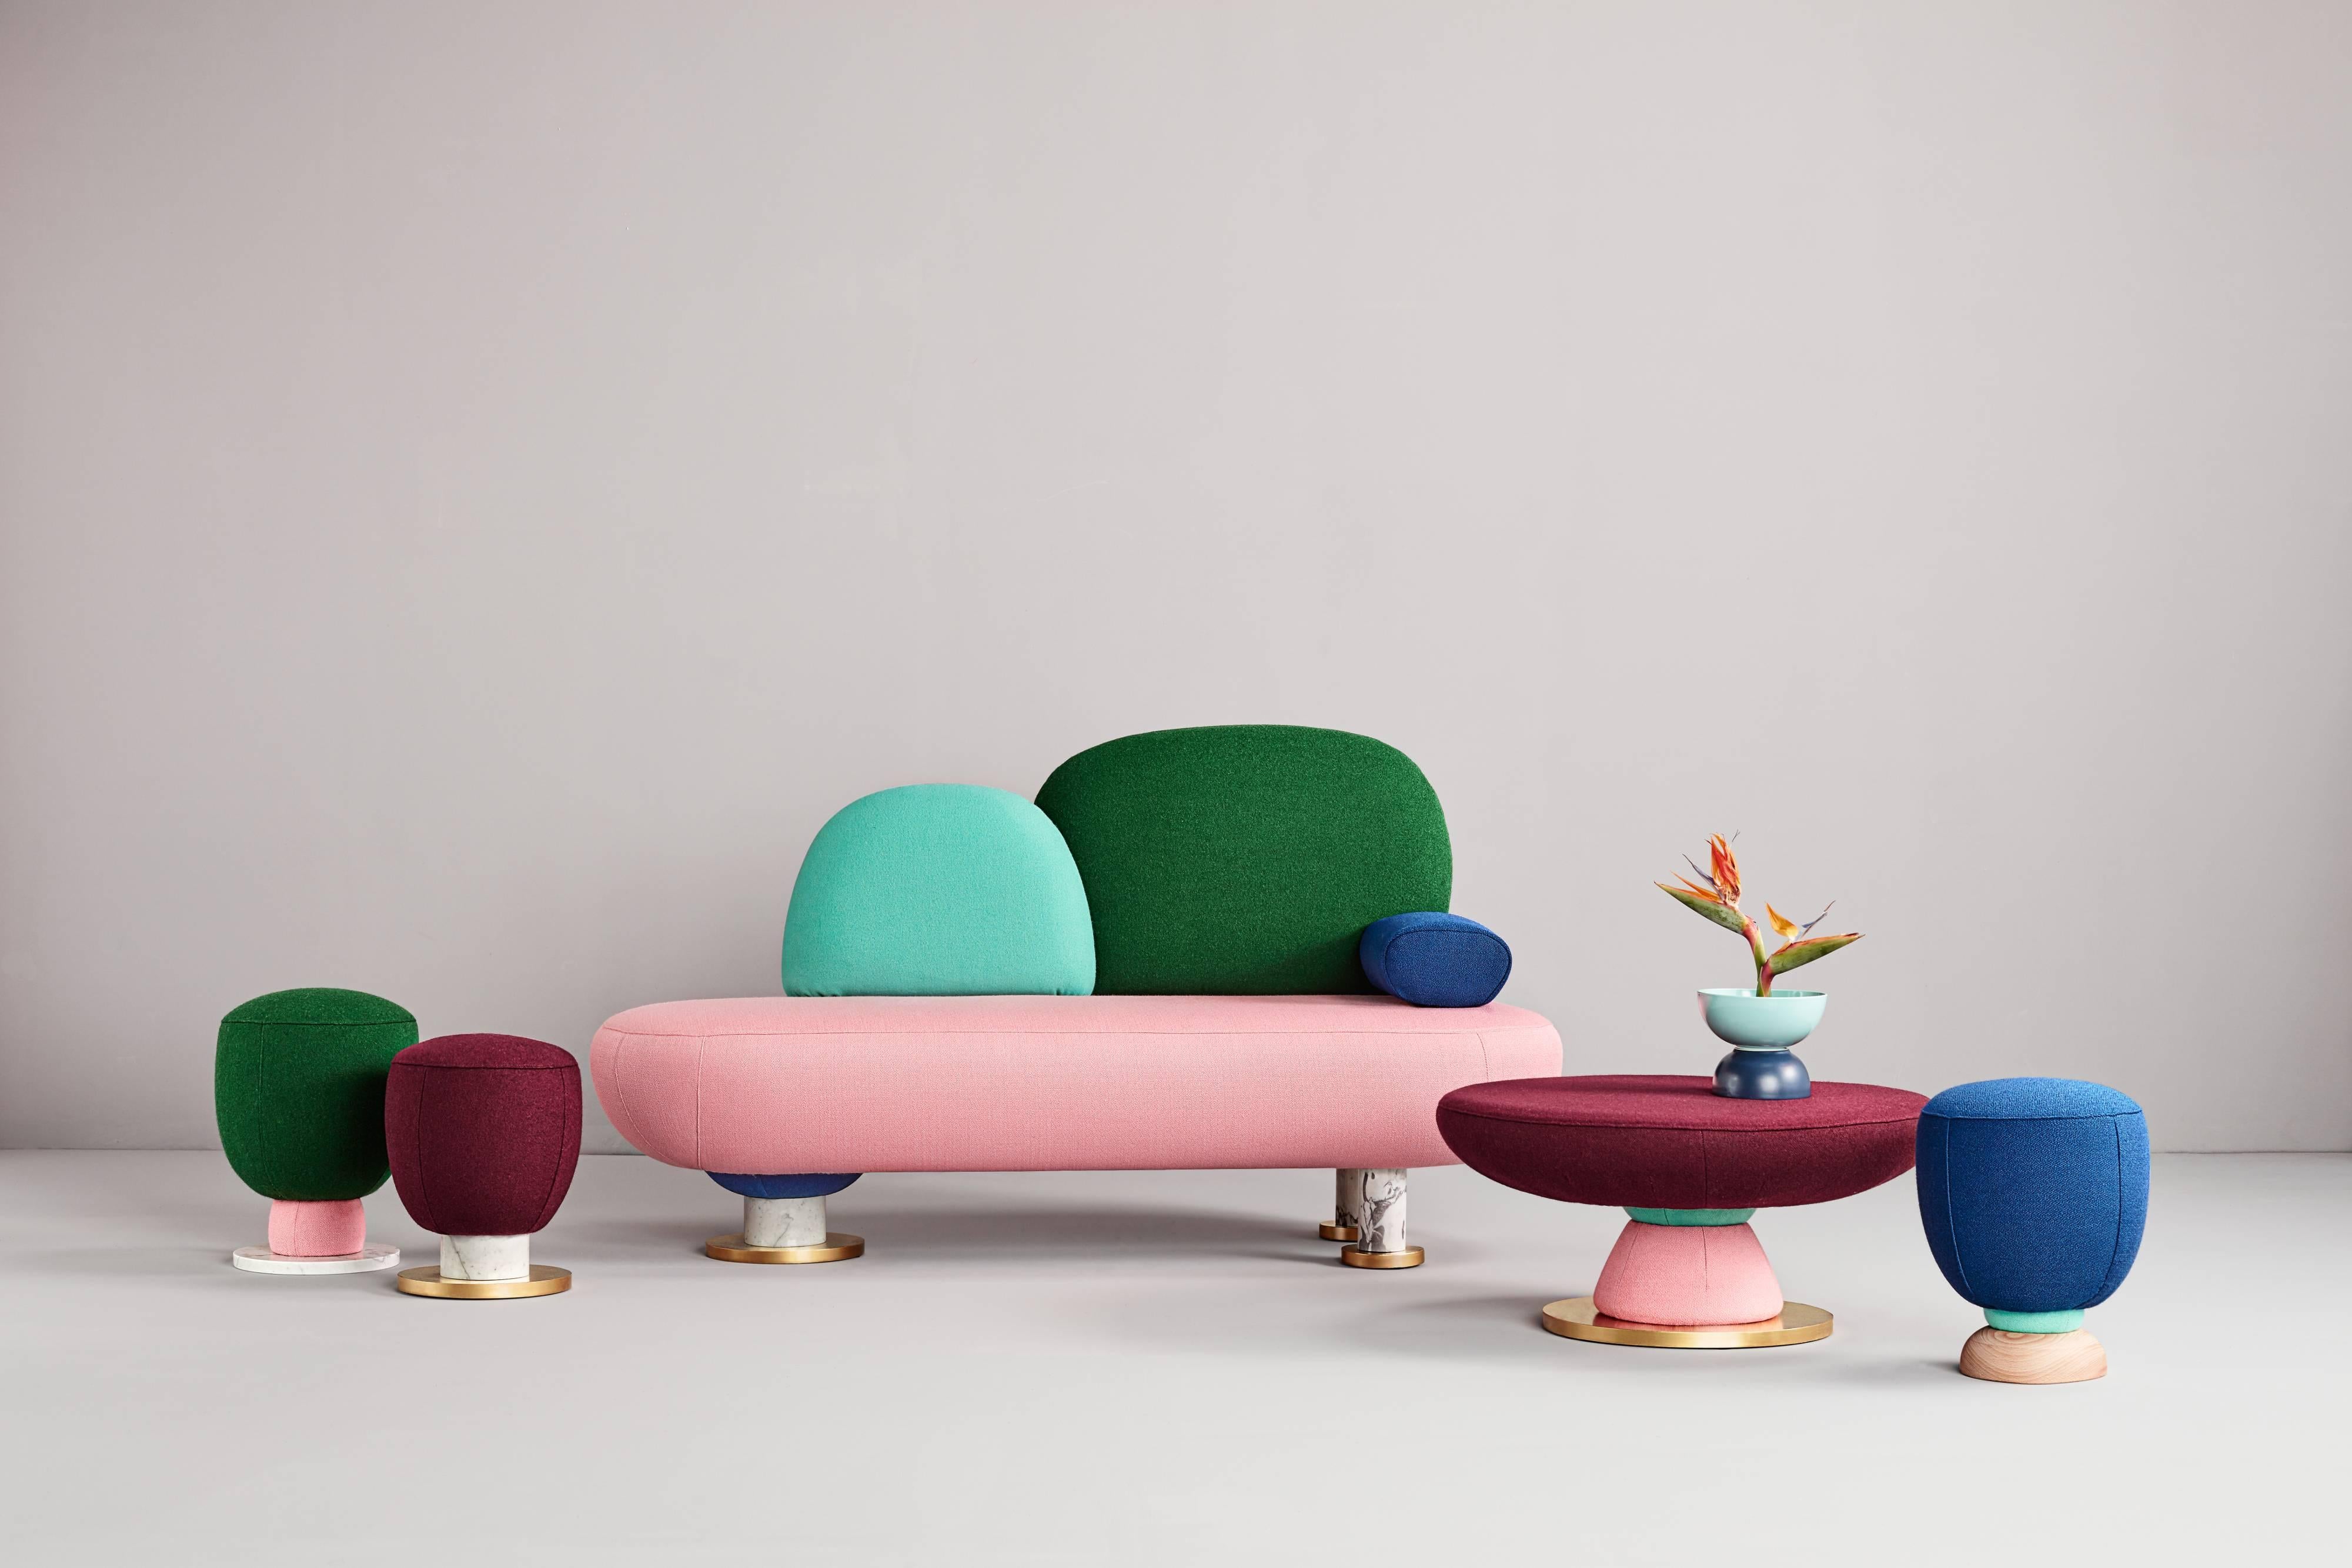 Toadstool Collection, sofa by Pepe Albargues

Dimensions and materials:

Dimensions: 88 x 160 x 75 cm
Materials: Beech, pine and particles board
wooden frame.
Fibre coated, polyurethane 3542 seat.
Fiberglass coated, HR22